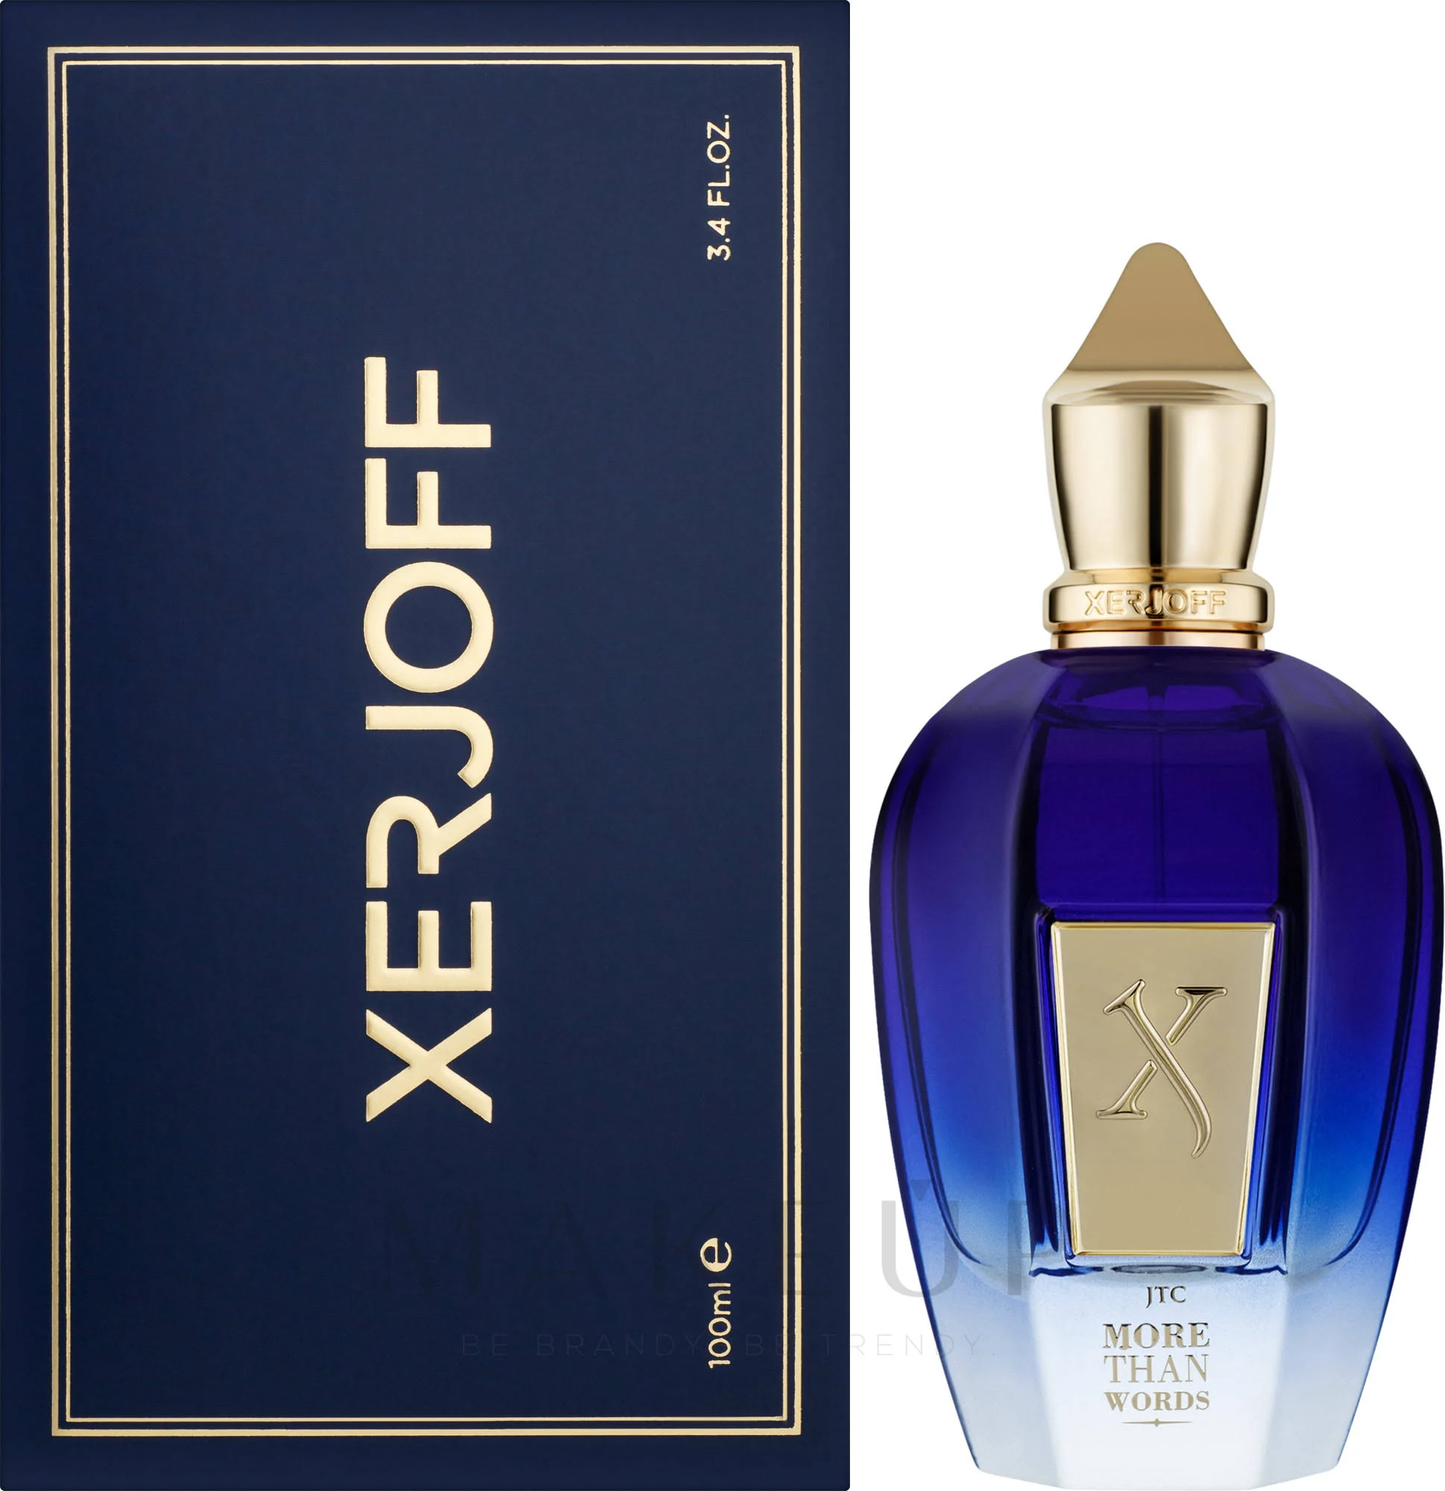 Discount Designer Brand Perfumes & Colognes  |  40 KNOTS Perfume By Xerjoff